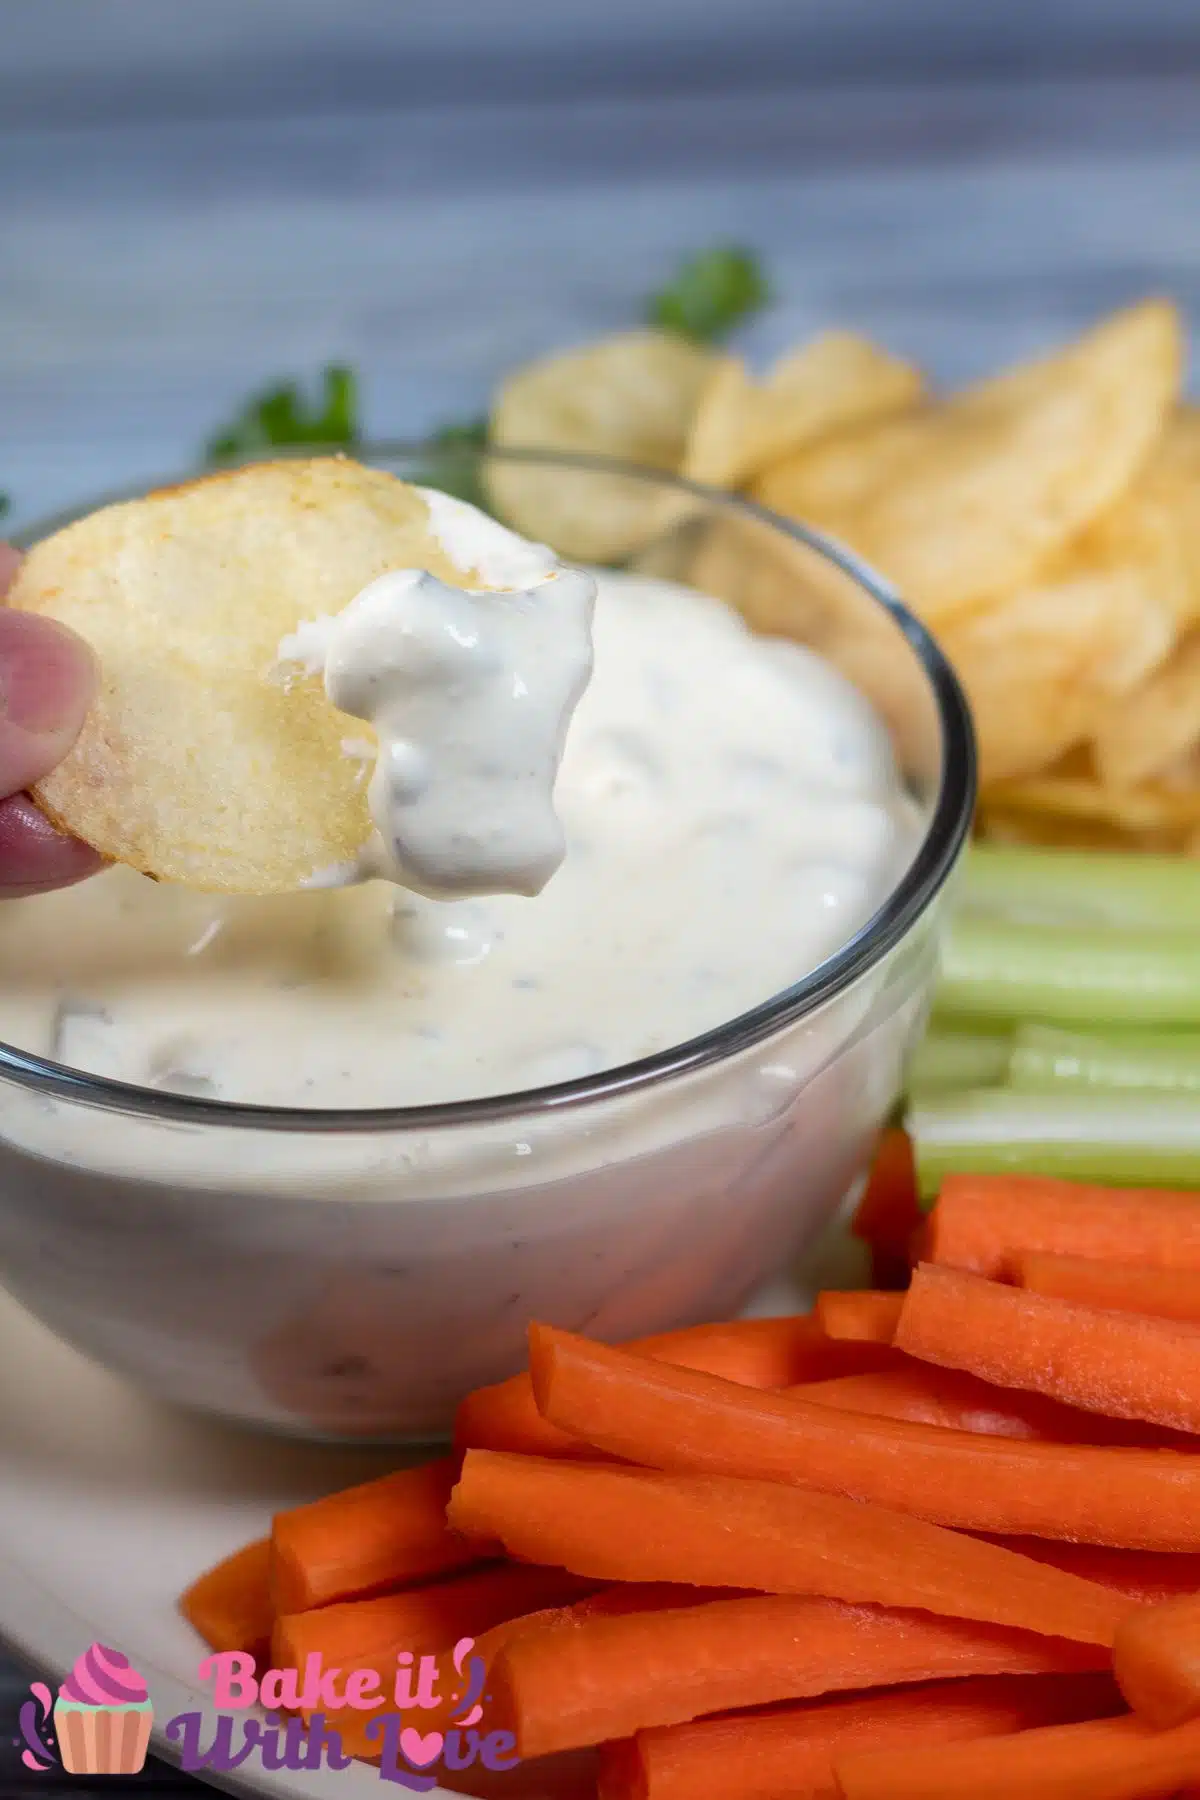 Tall image showing dill pickle dip with carrots, chips, and celery.